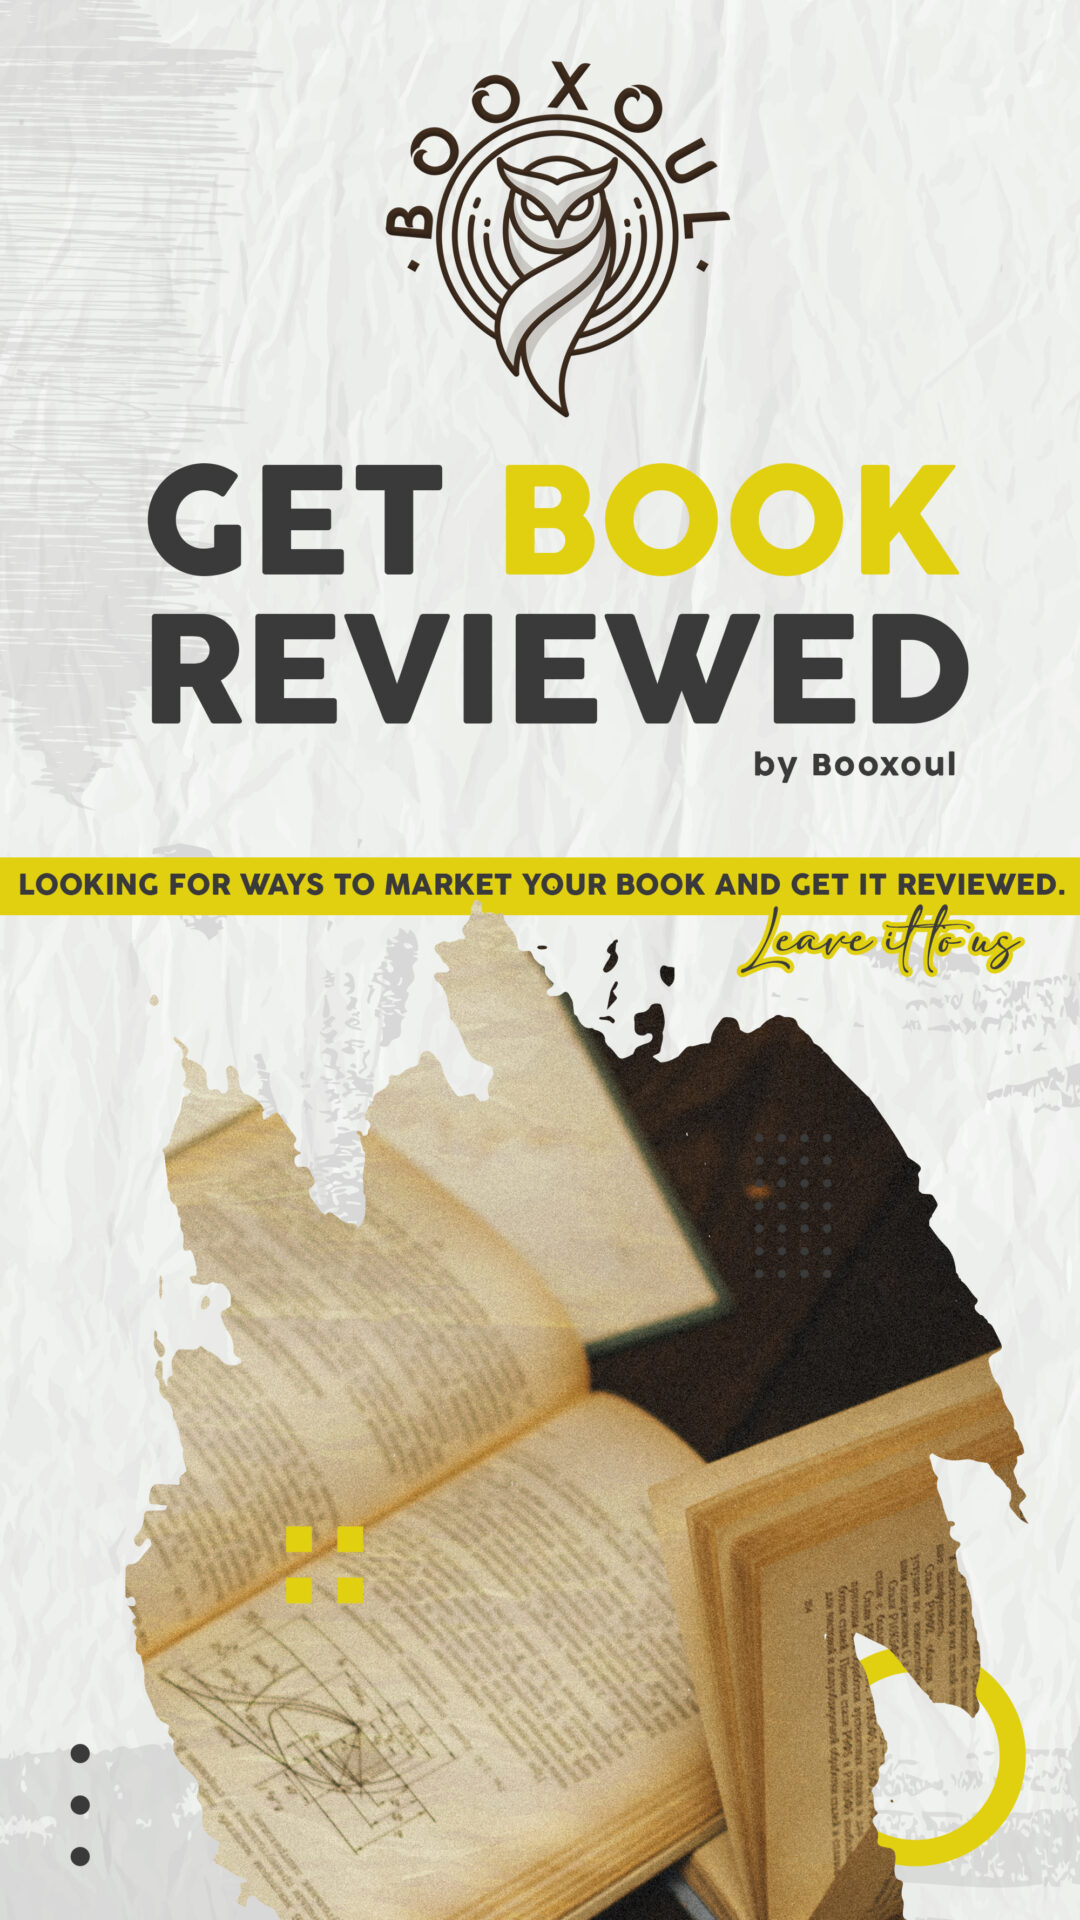 How to get book reviewed